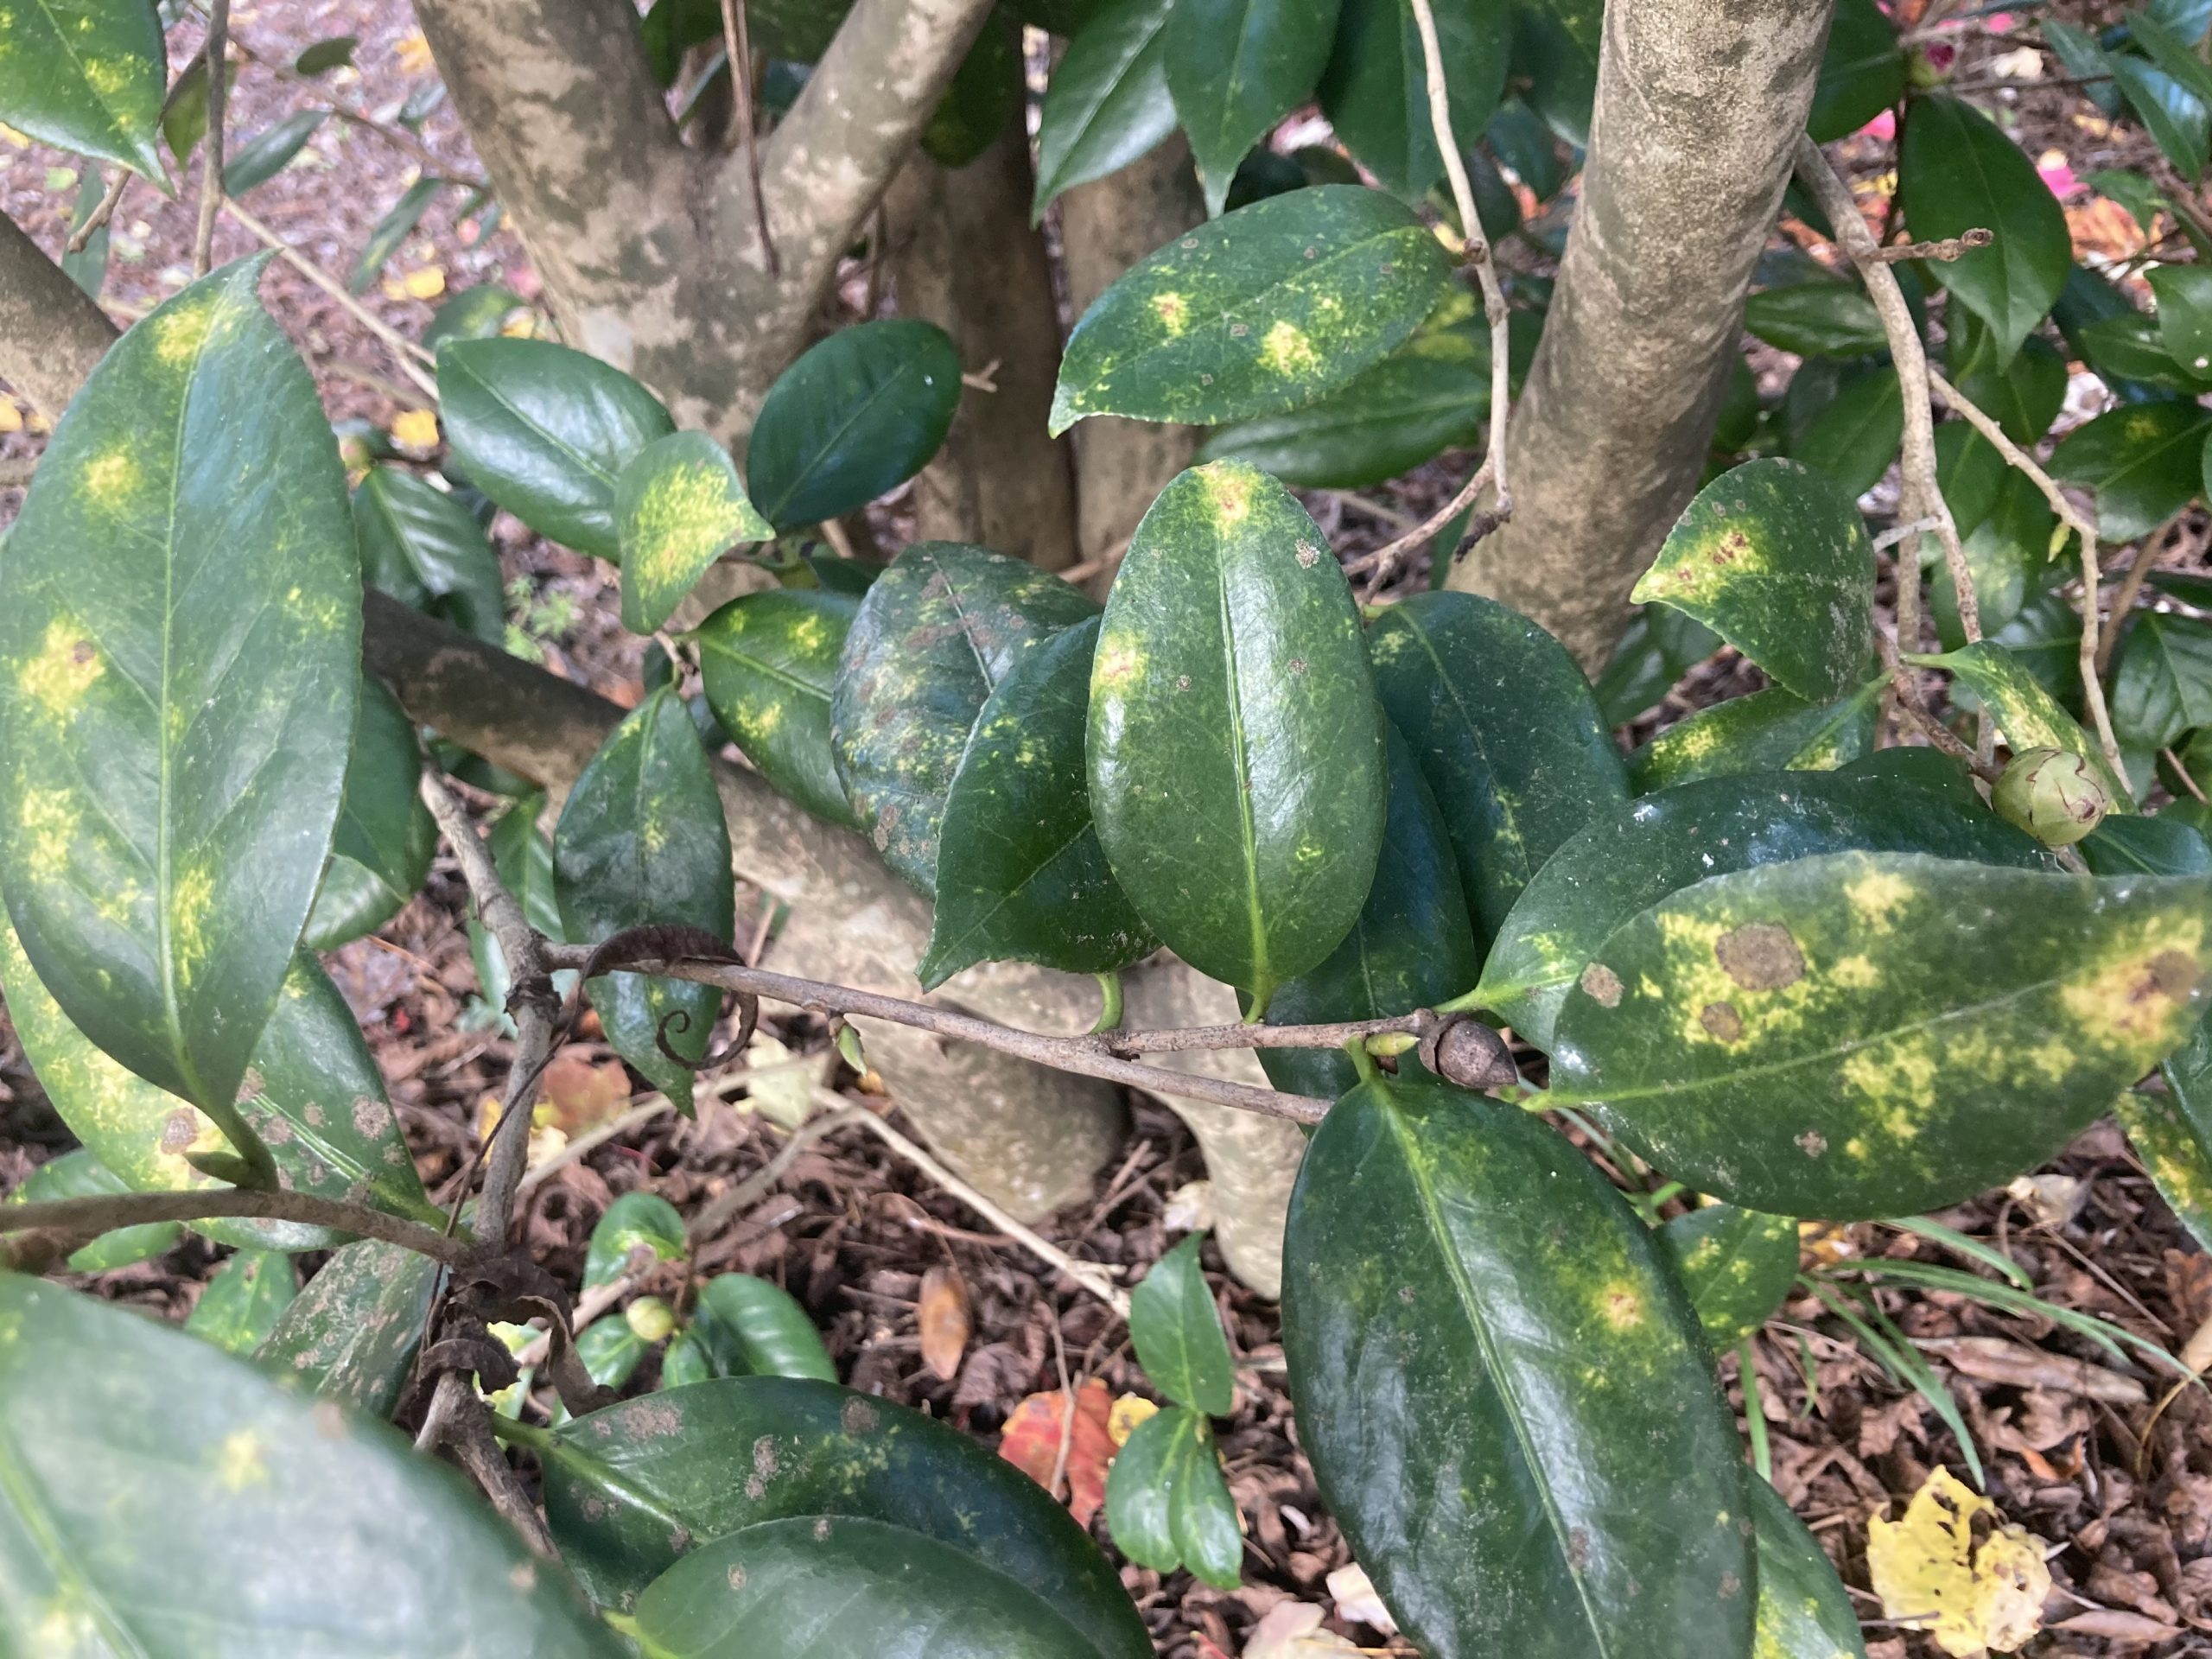 Tea scale is the most serious insect pest of flowering camellias. Spraying the undersides of the leaves helps control it; the more open your plant, the better coverage you can achieve. 